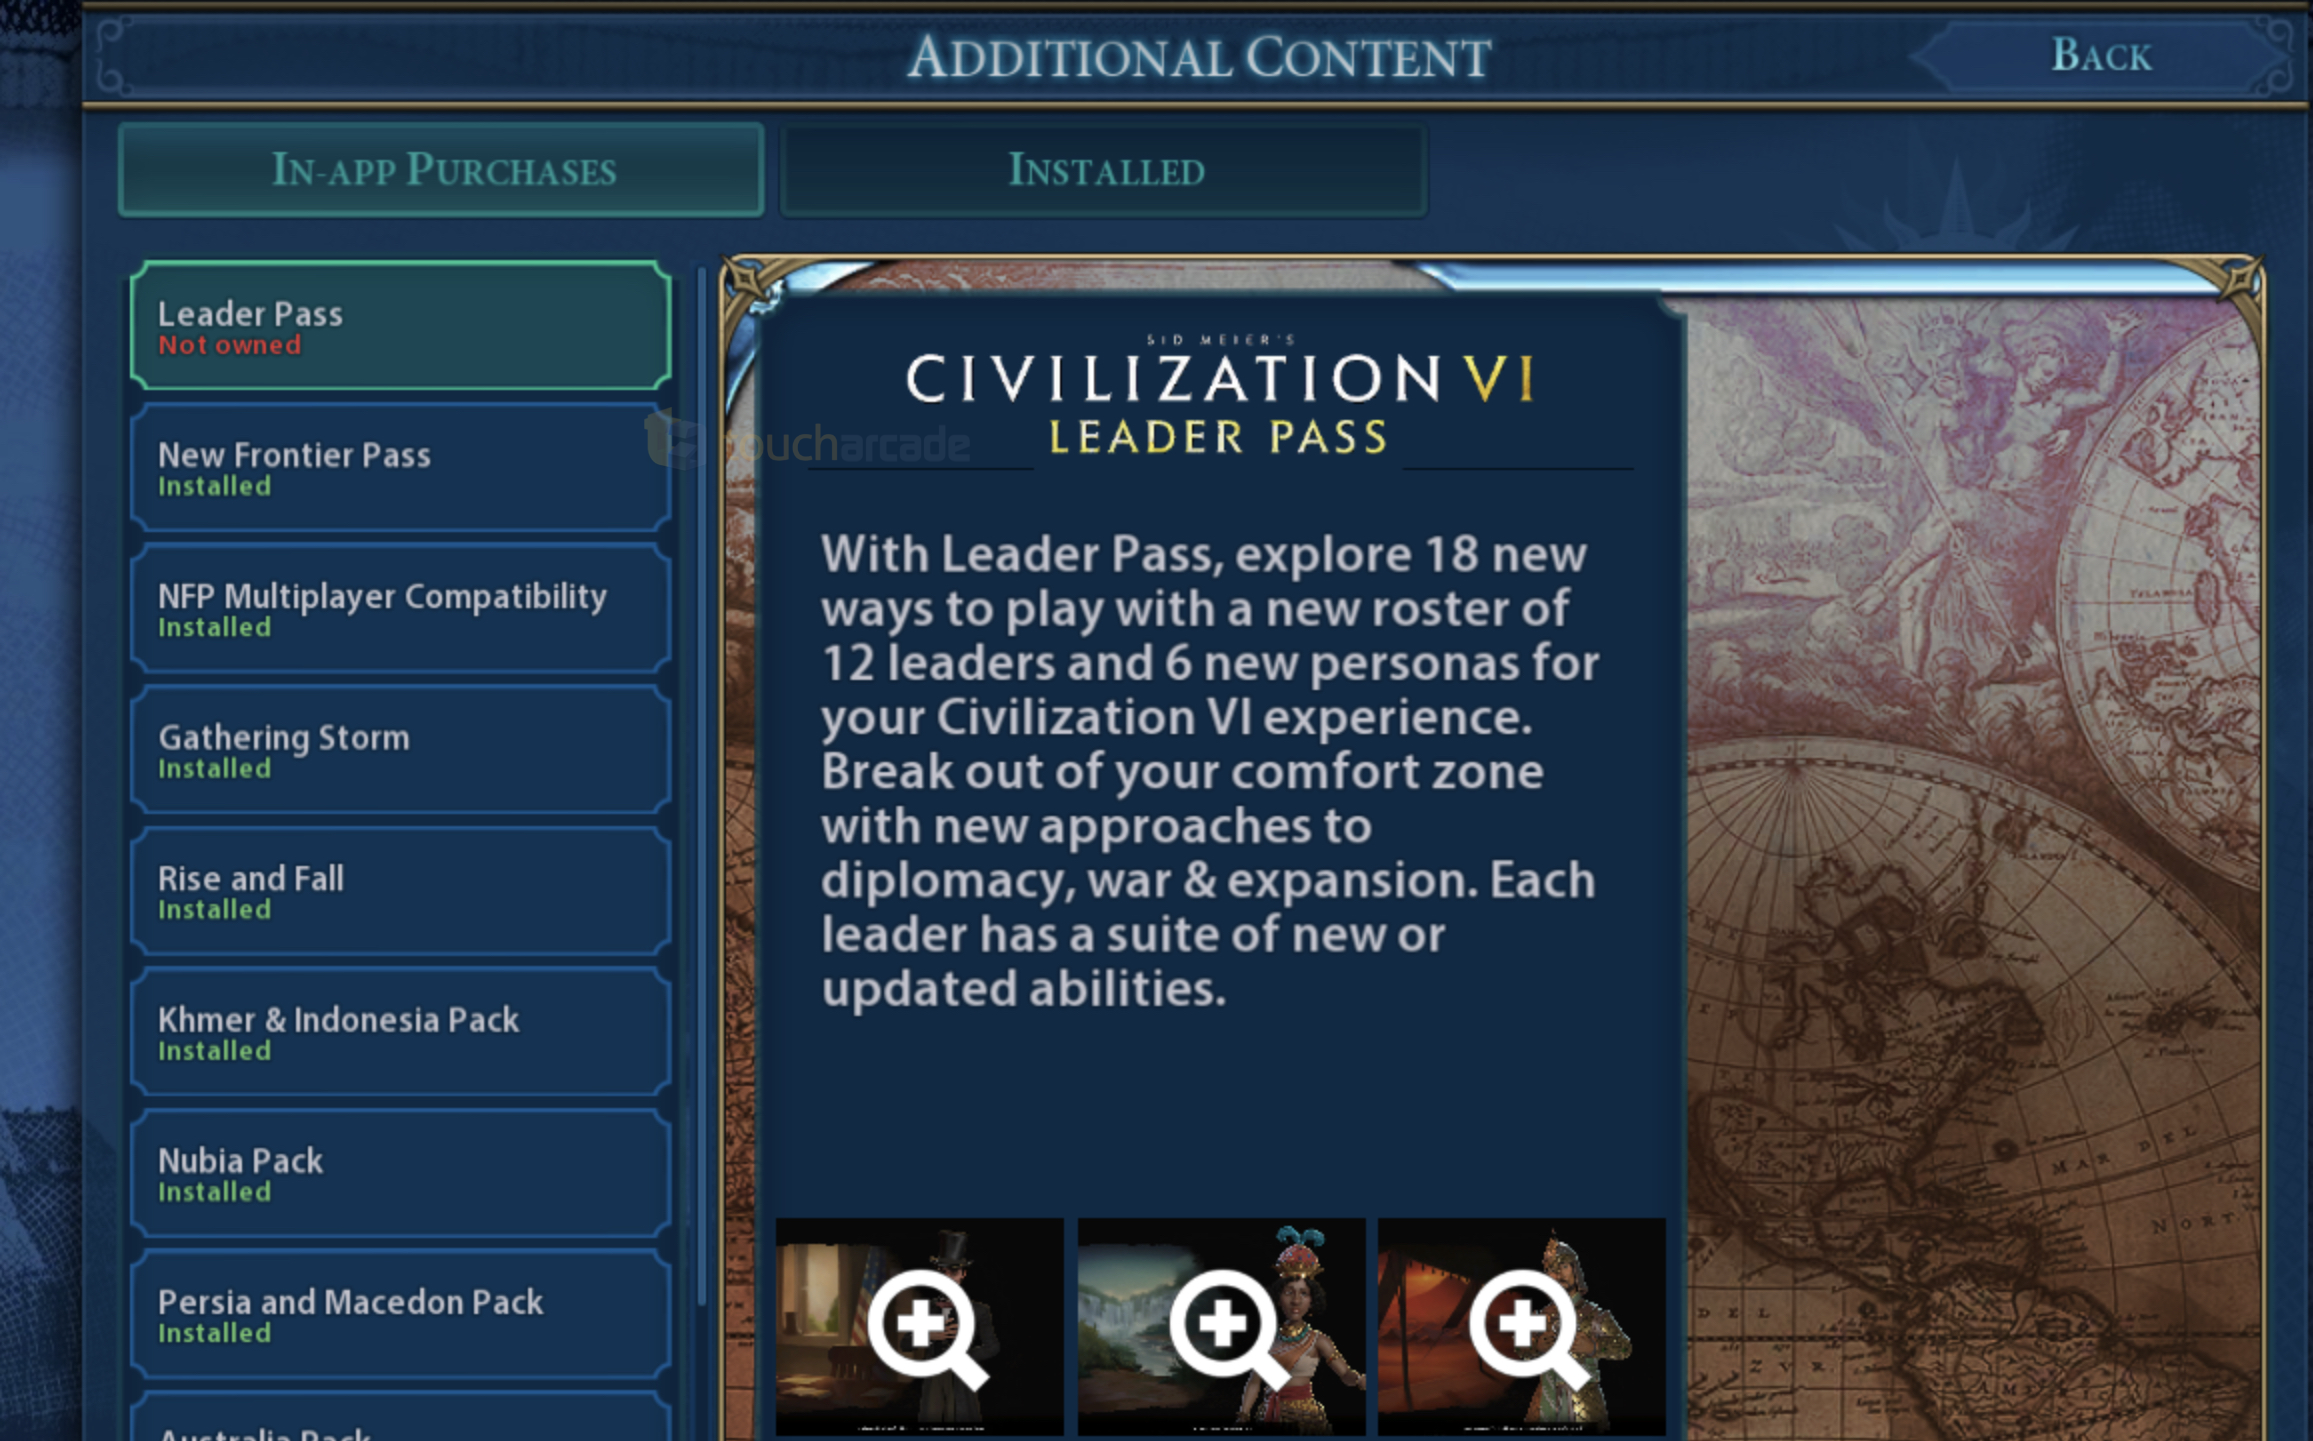 ‘Civilization VI’ Leader Pass Now Available on iOS and PC Platforms, Still No Visual Improvements